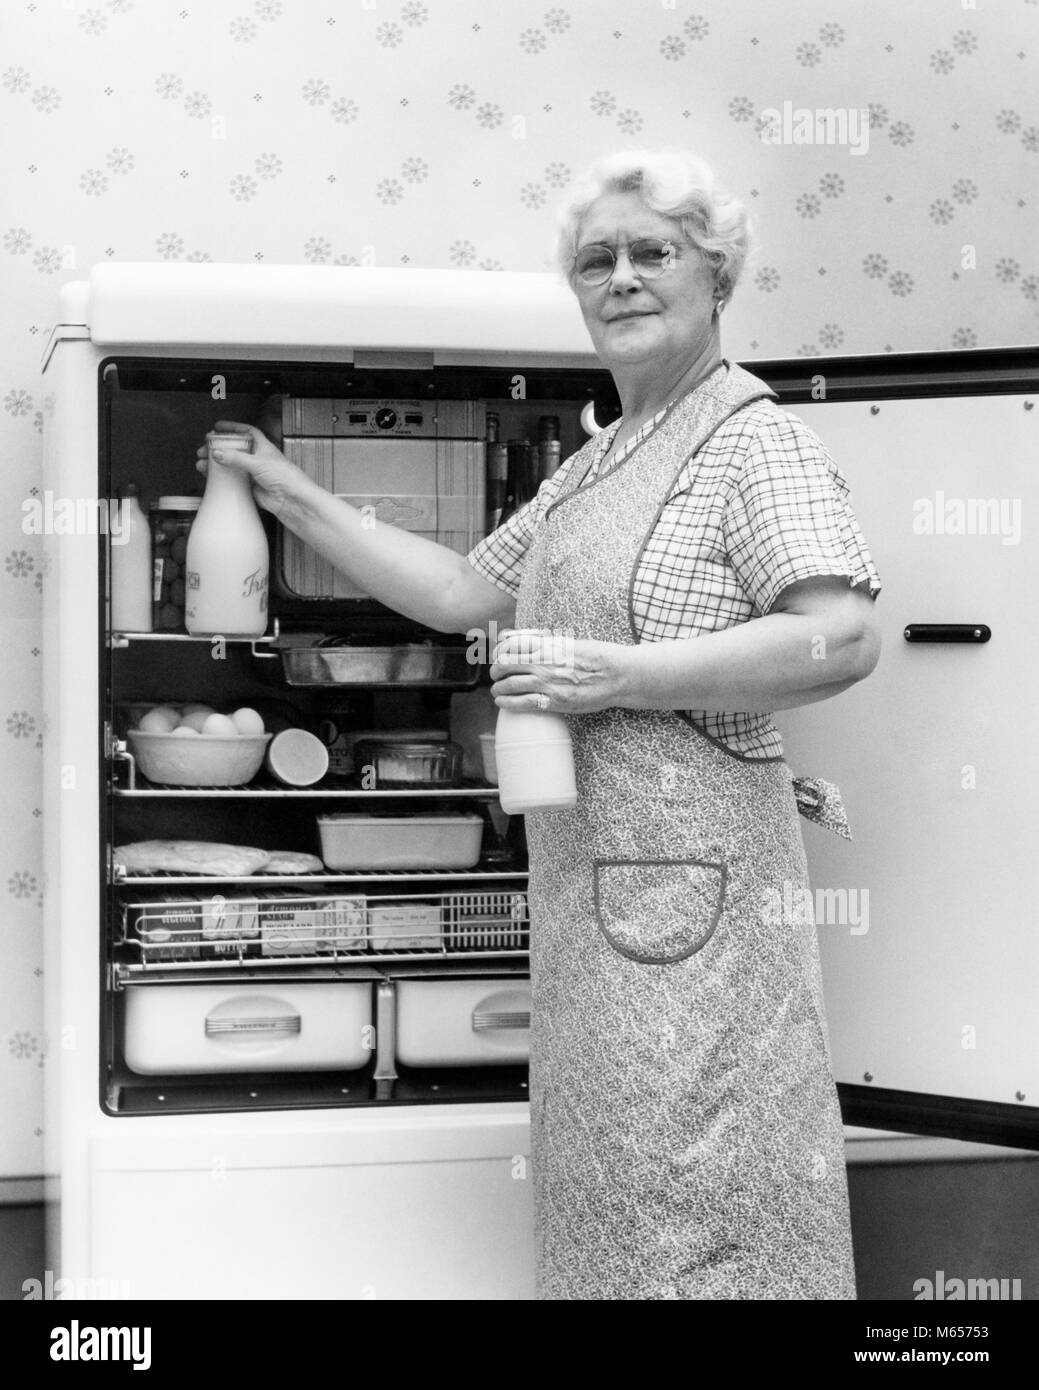 1930s 1940s SENIOR WOMAN HOUSEWIFE GRANDMOTHER LOOKING AT CAMERA TAKING TWO GLASS BOTTLES OF MILK OUT OF KITCHEN REFRIGERATOR - h5891 HAR001 HARS FULL-LENGTH HALF-LENGTH LADIES INDOORS CONFIDENCE SENIOR ADULT NOSTALGIA MIDDLE-AGED SENIOR WOMAN 50-55 YEARS 55-60 YEARS 60-65 YEARS MIDDLE-AGED WOMAN OLDSTERS OLDSTER CHOICE PRIDE ELDERS B&W BLACK AND WHITE CAUCASIAN ETHNICITY LOOKING AT CAMERA OLD FASHIONED PERSONS PLACING TAKING FROM Stock Photo